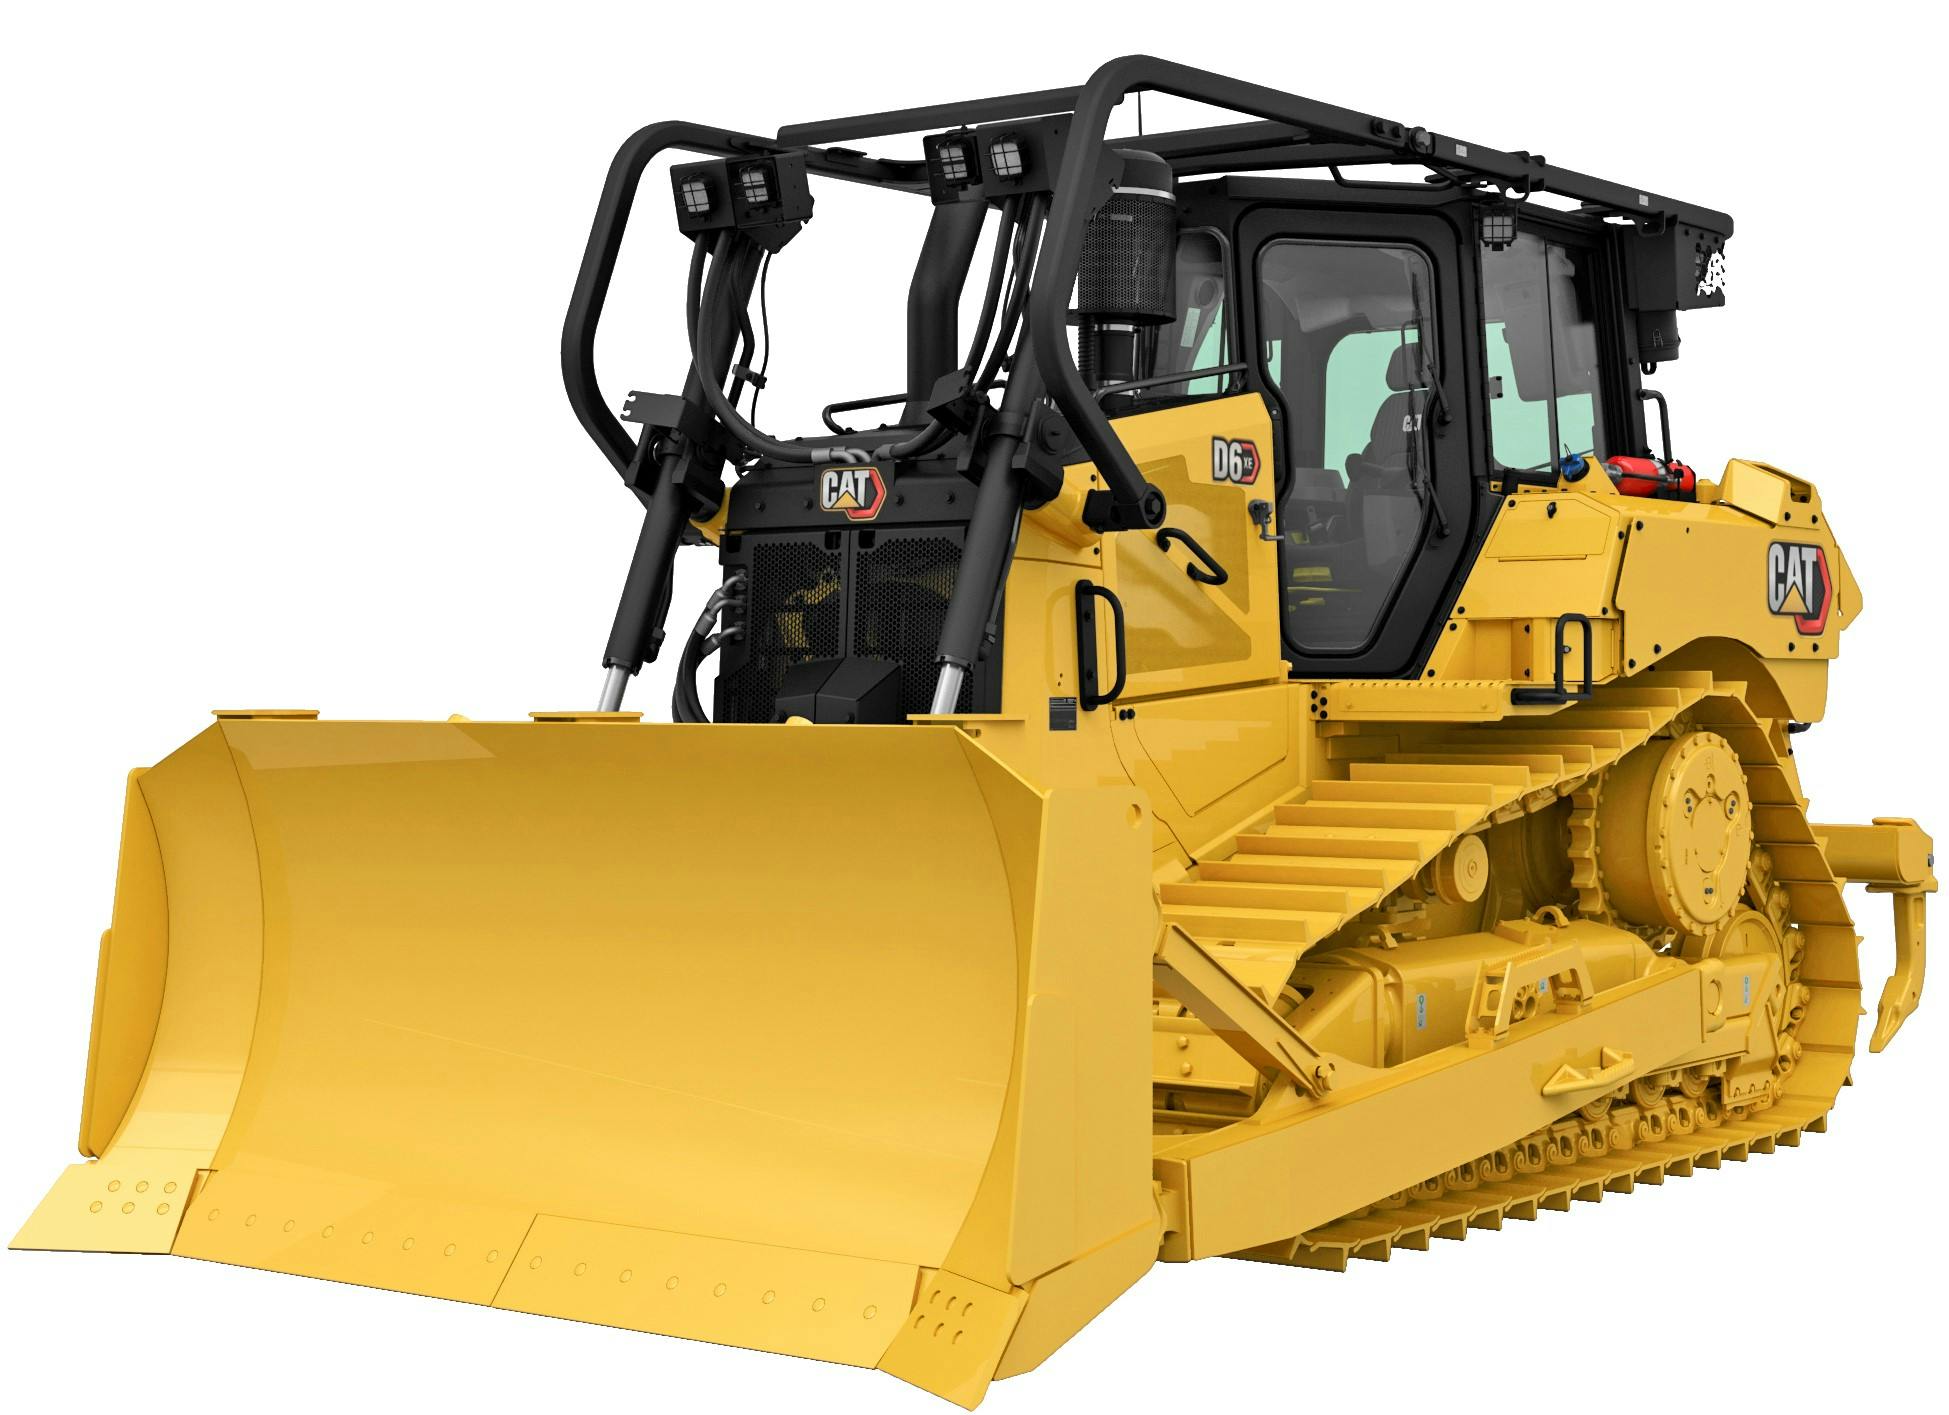 The next generation Cat D6XE Dozer is now available at Carolina Cat!